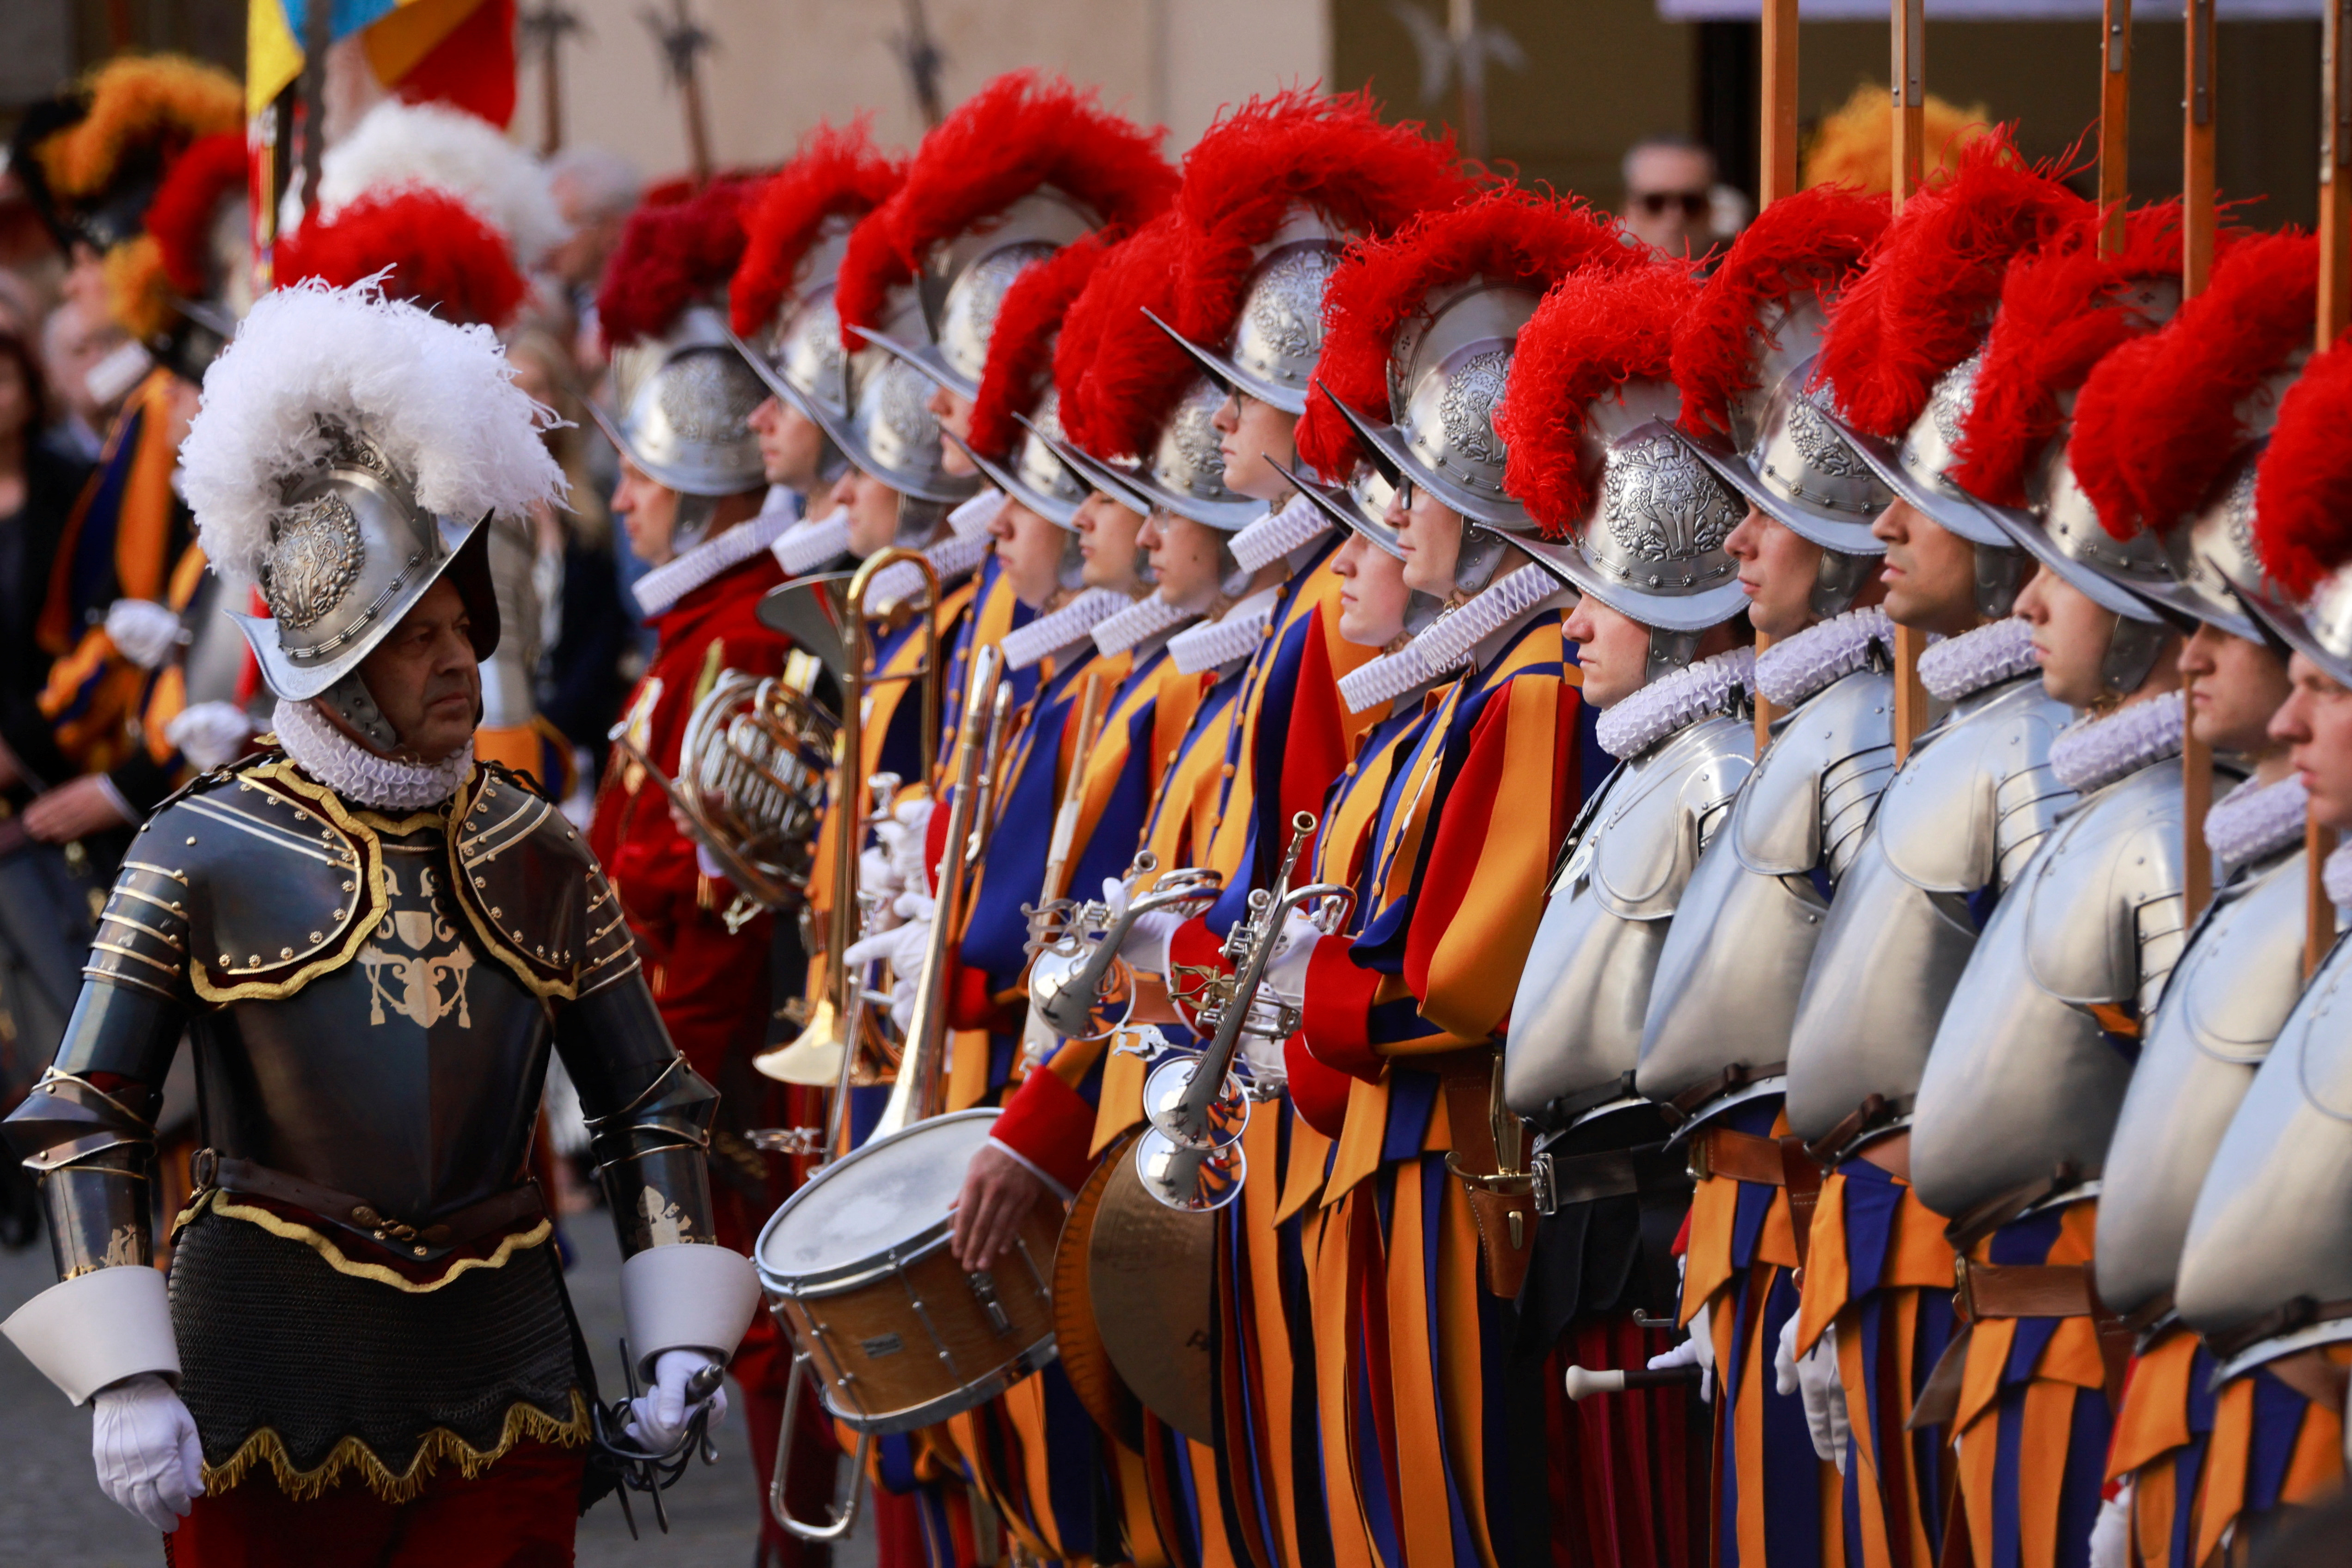 Swiss Guards attend their swearing-in ceremony at the Vatican